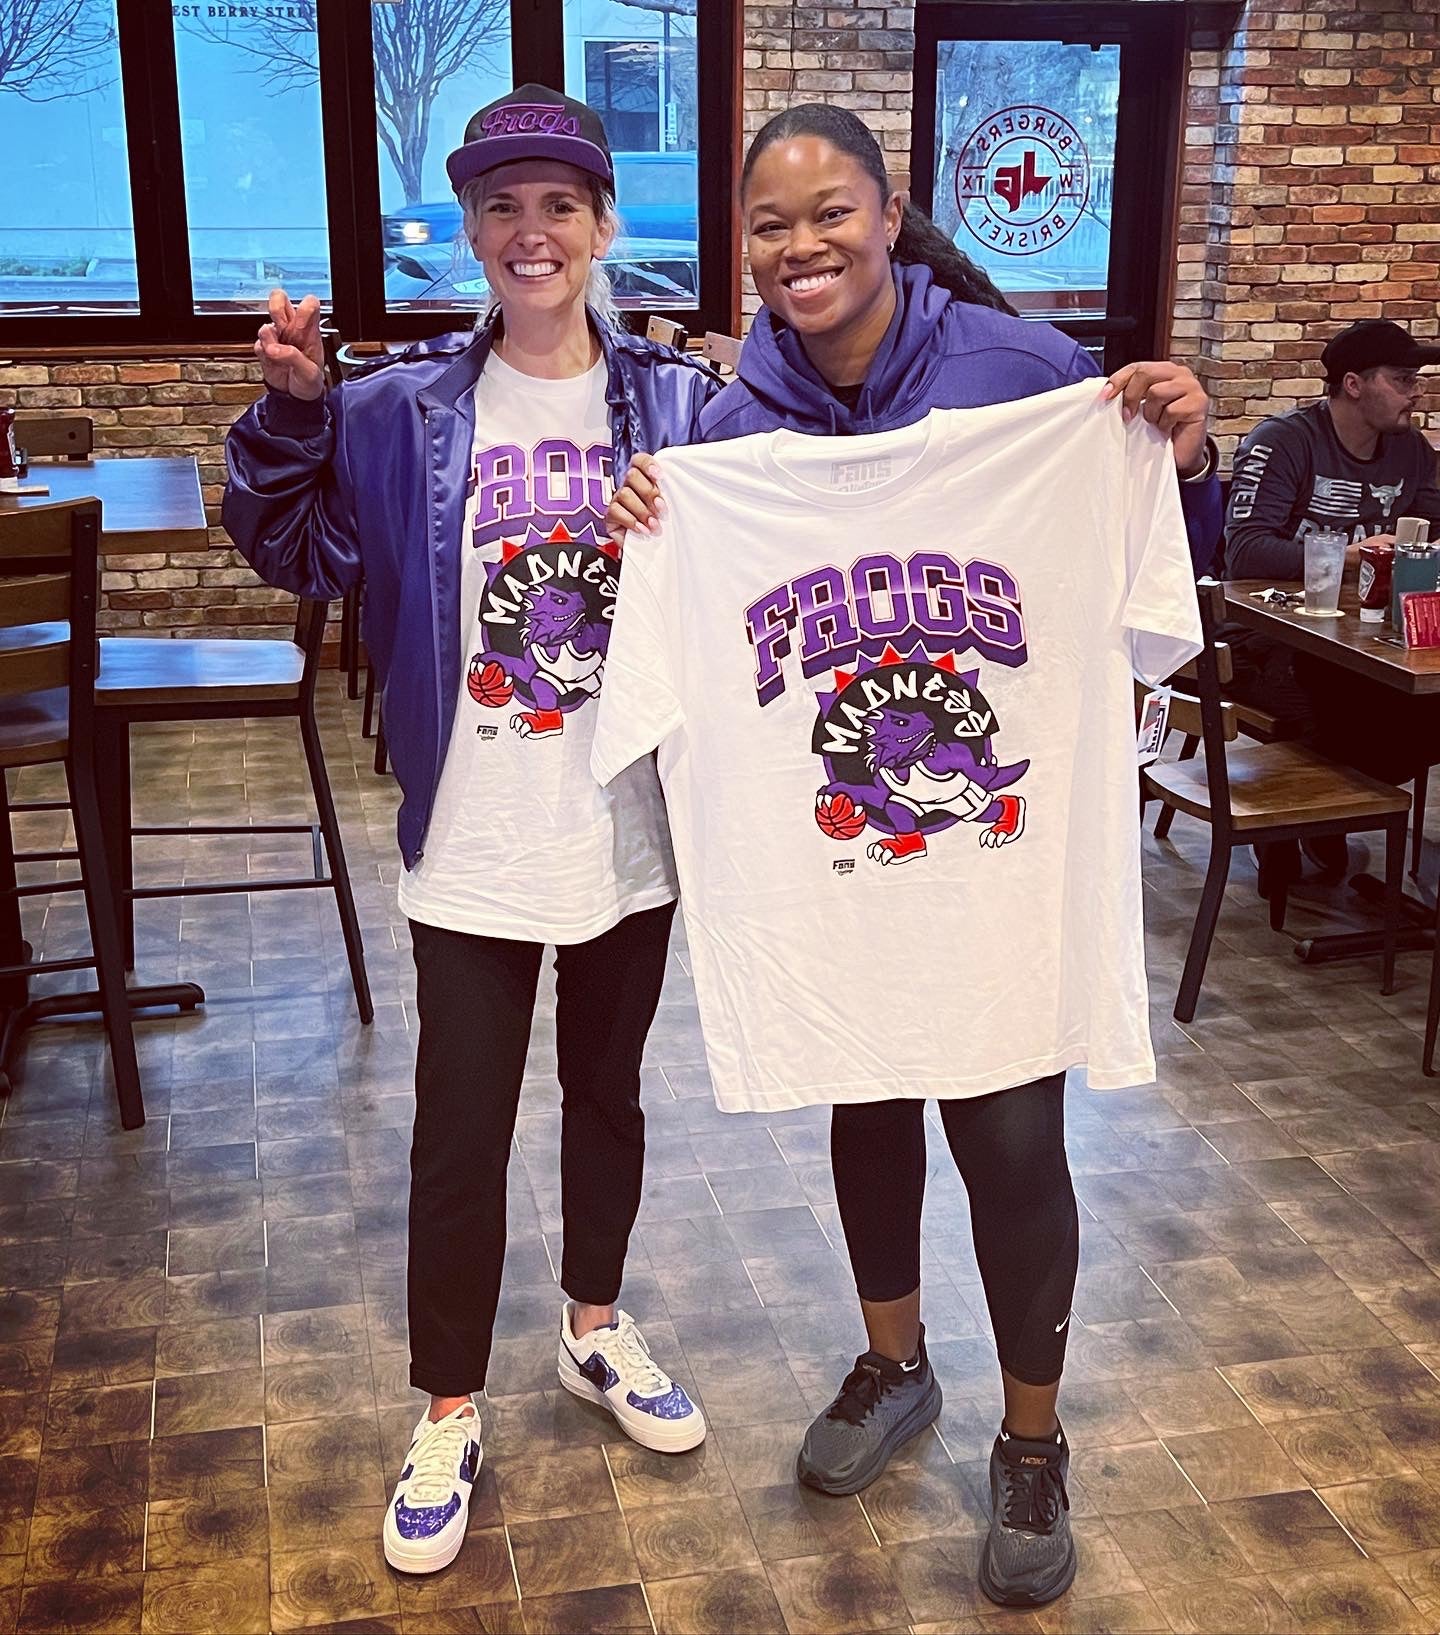 2023 FROGS MADNESS TEE!